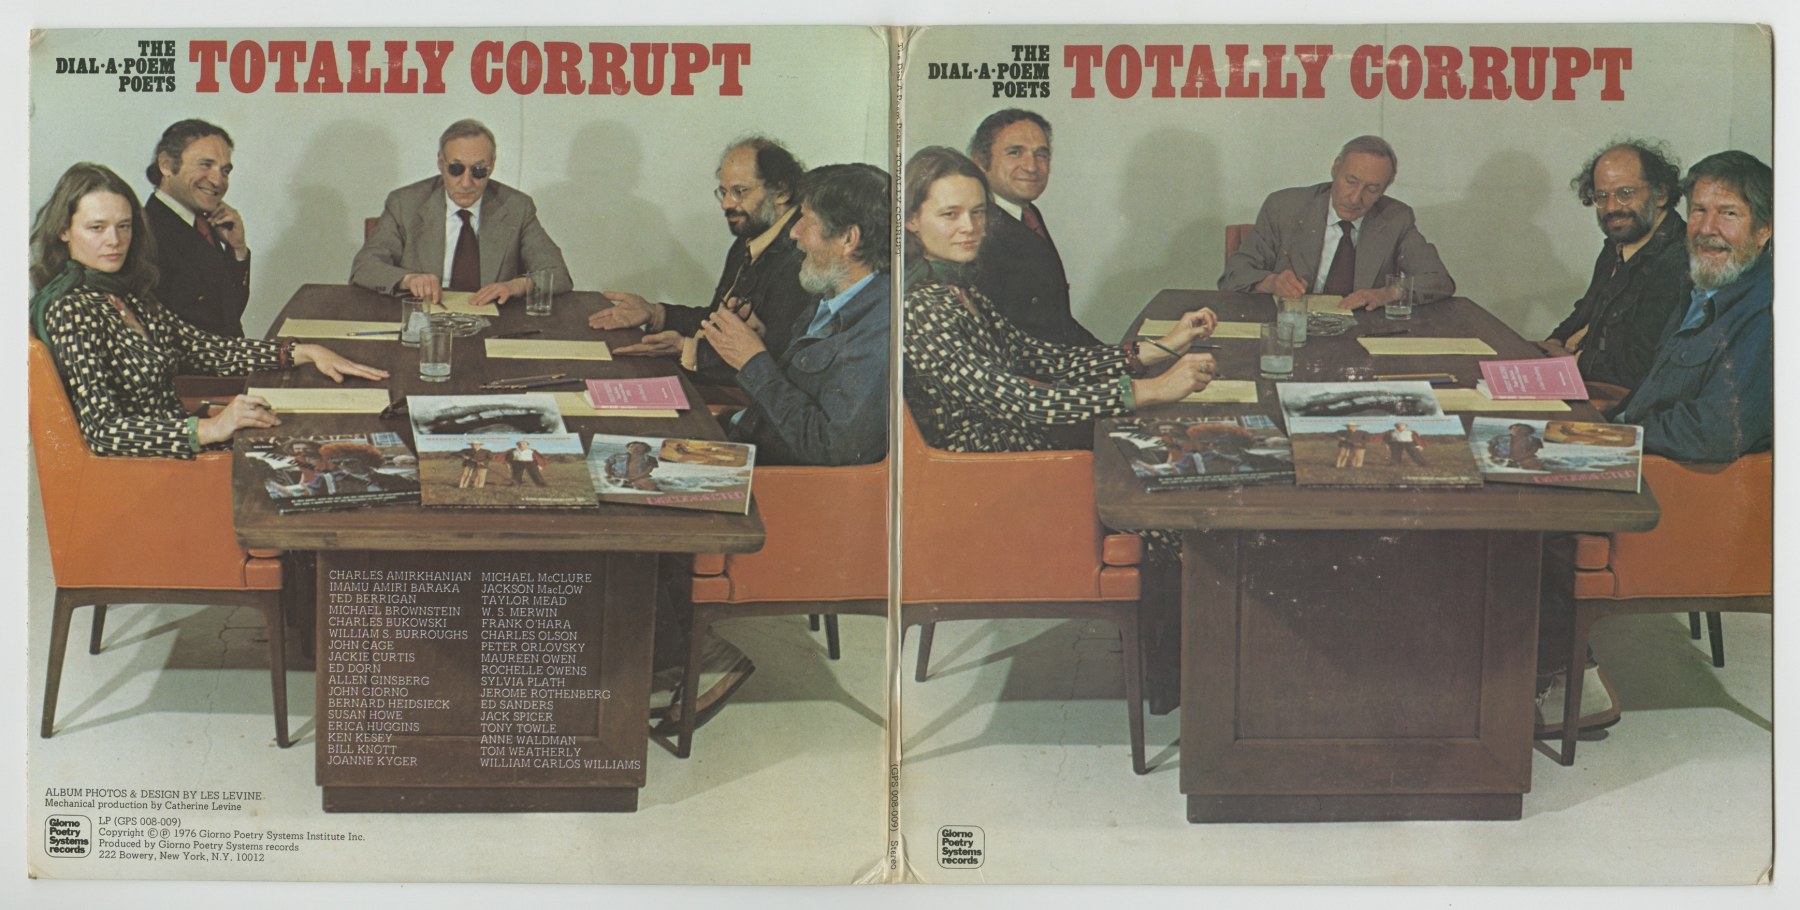 The Dial-A-Poem Poets: Totally Corrupt (1976), front and back covers